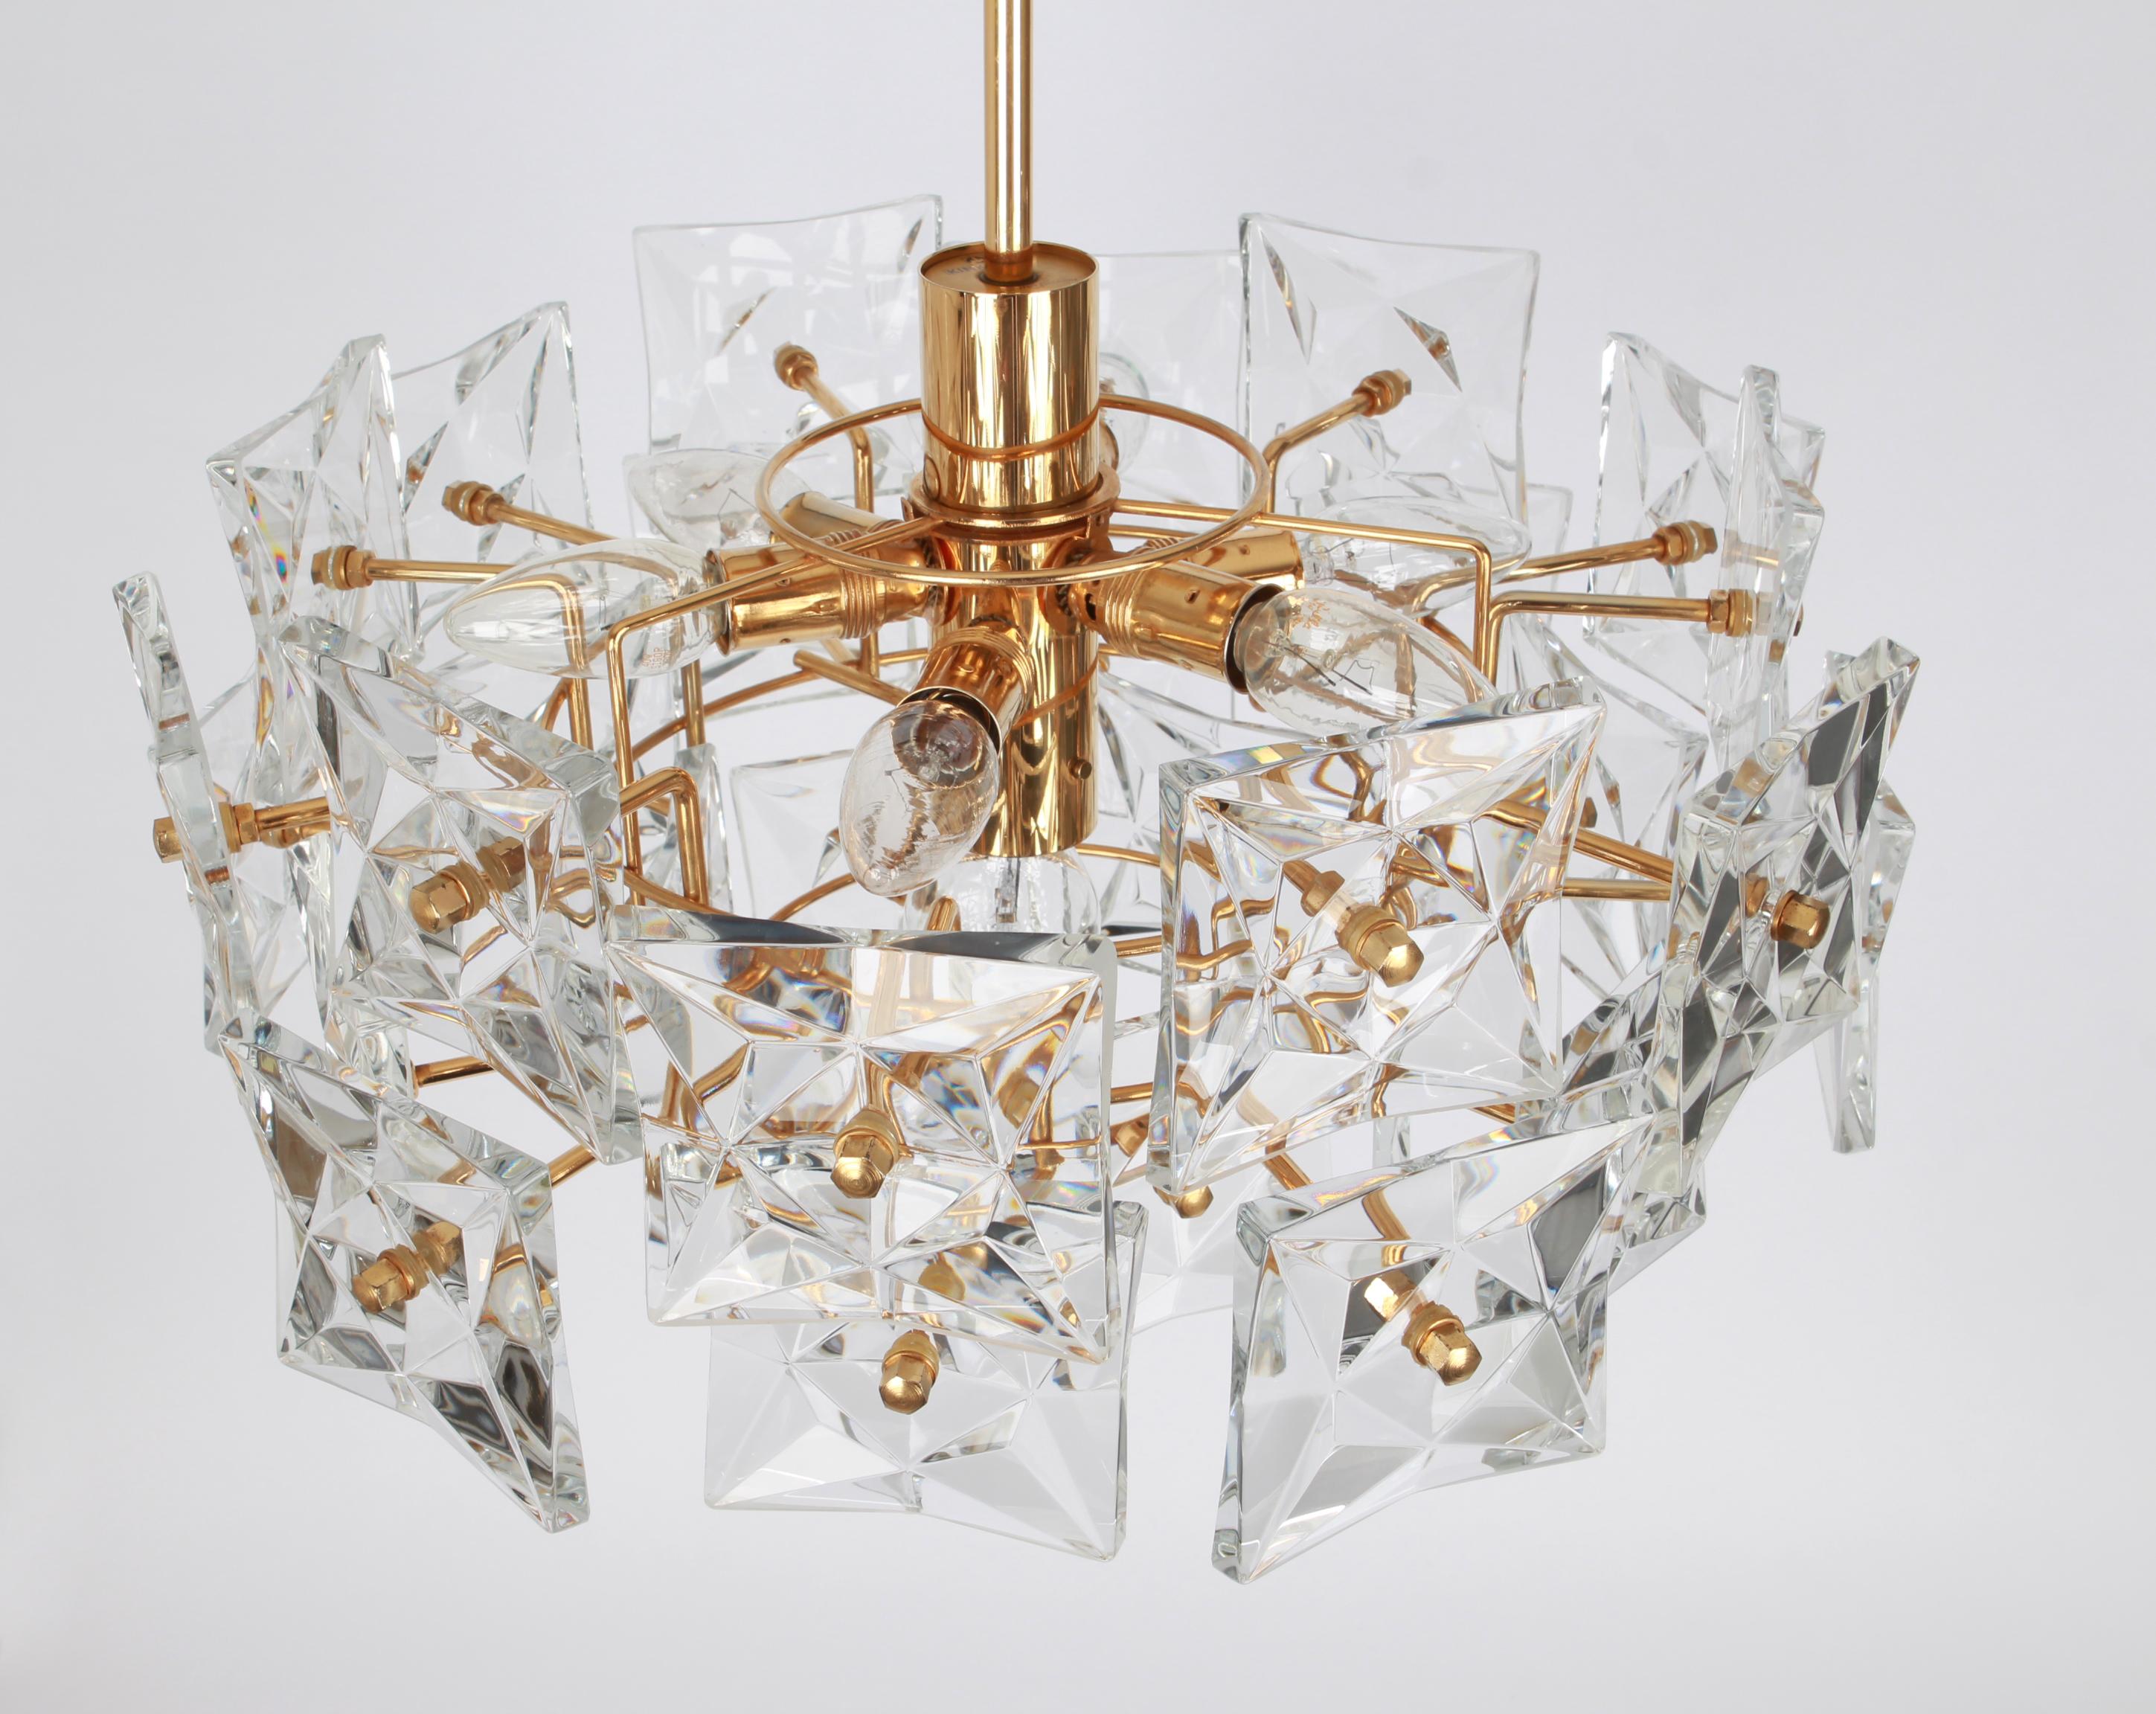 Stunning Chandelier, Brass and Crystal Glass by Kinkeldey, Germany, 1970s For Sale 8